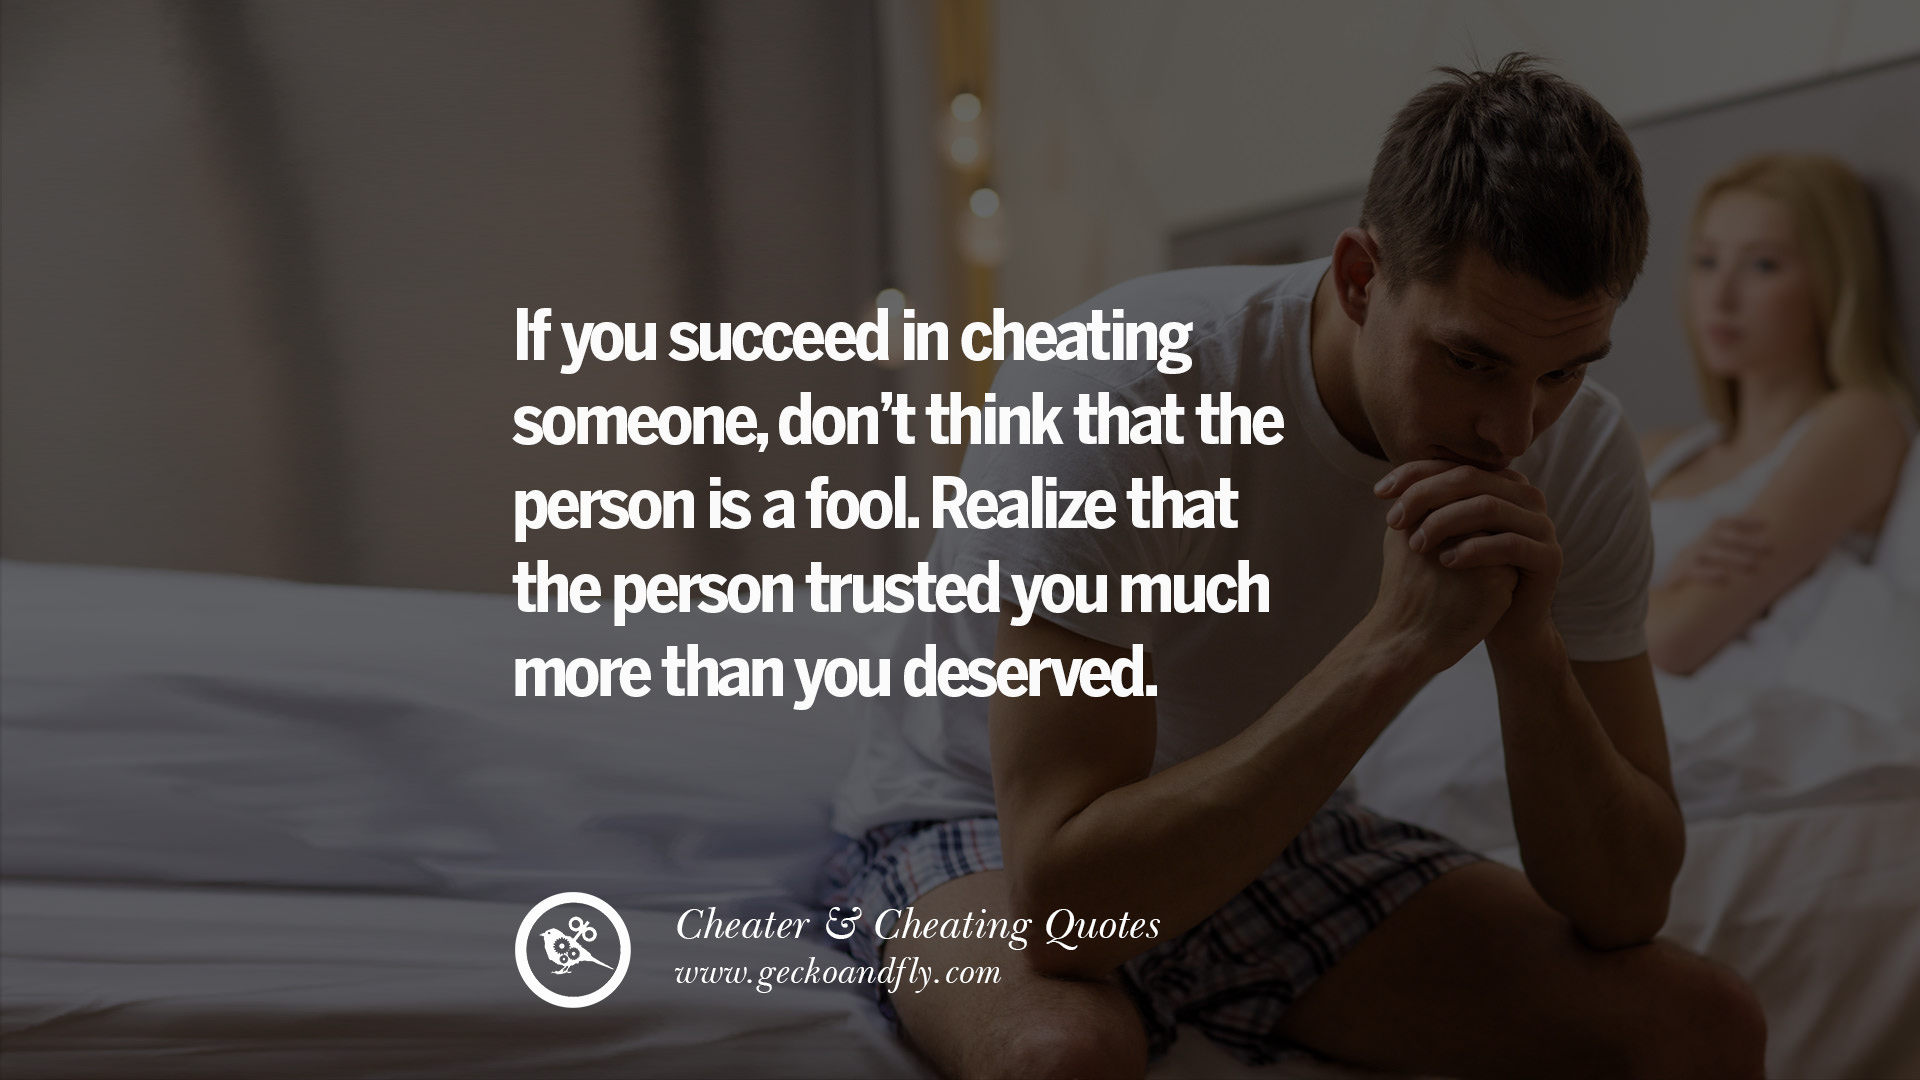 60 Quotes On Cheating Boyfriend And Lying Husband. 